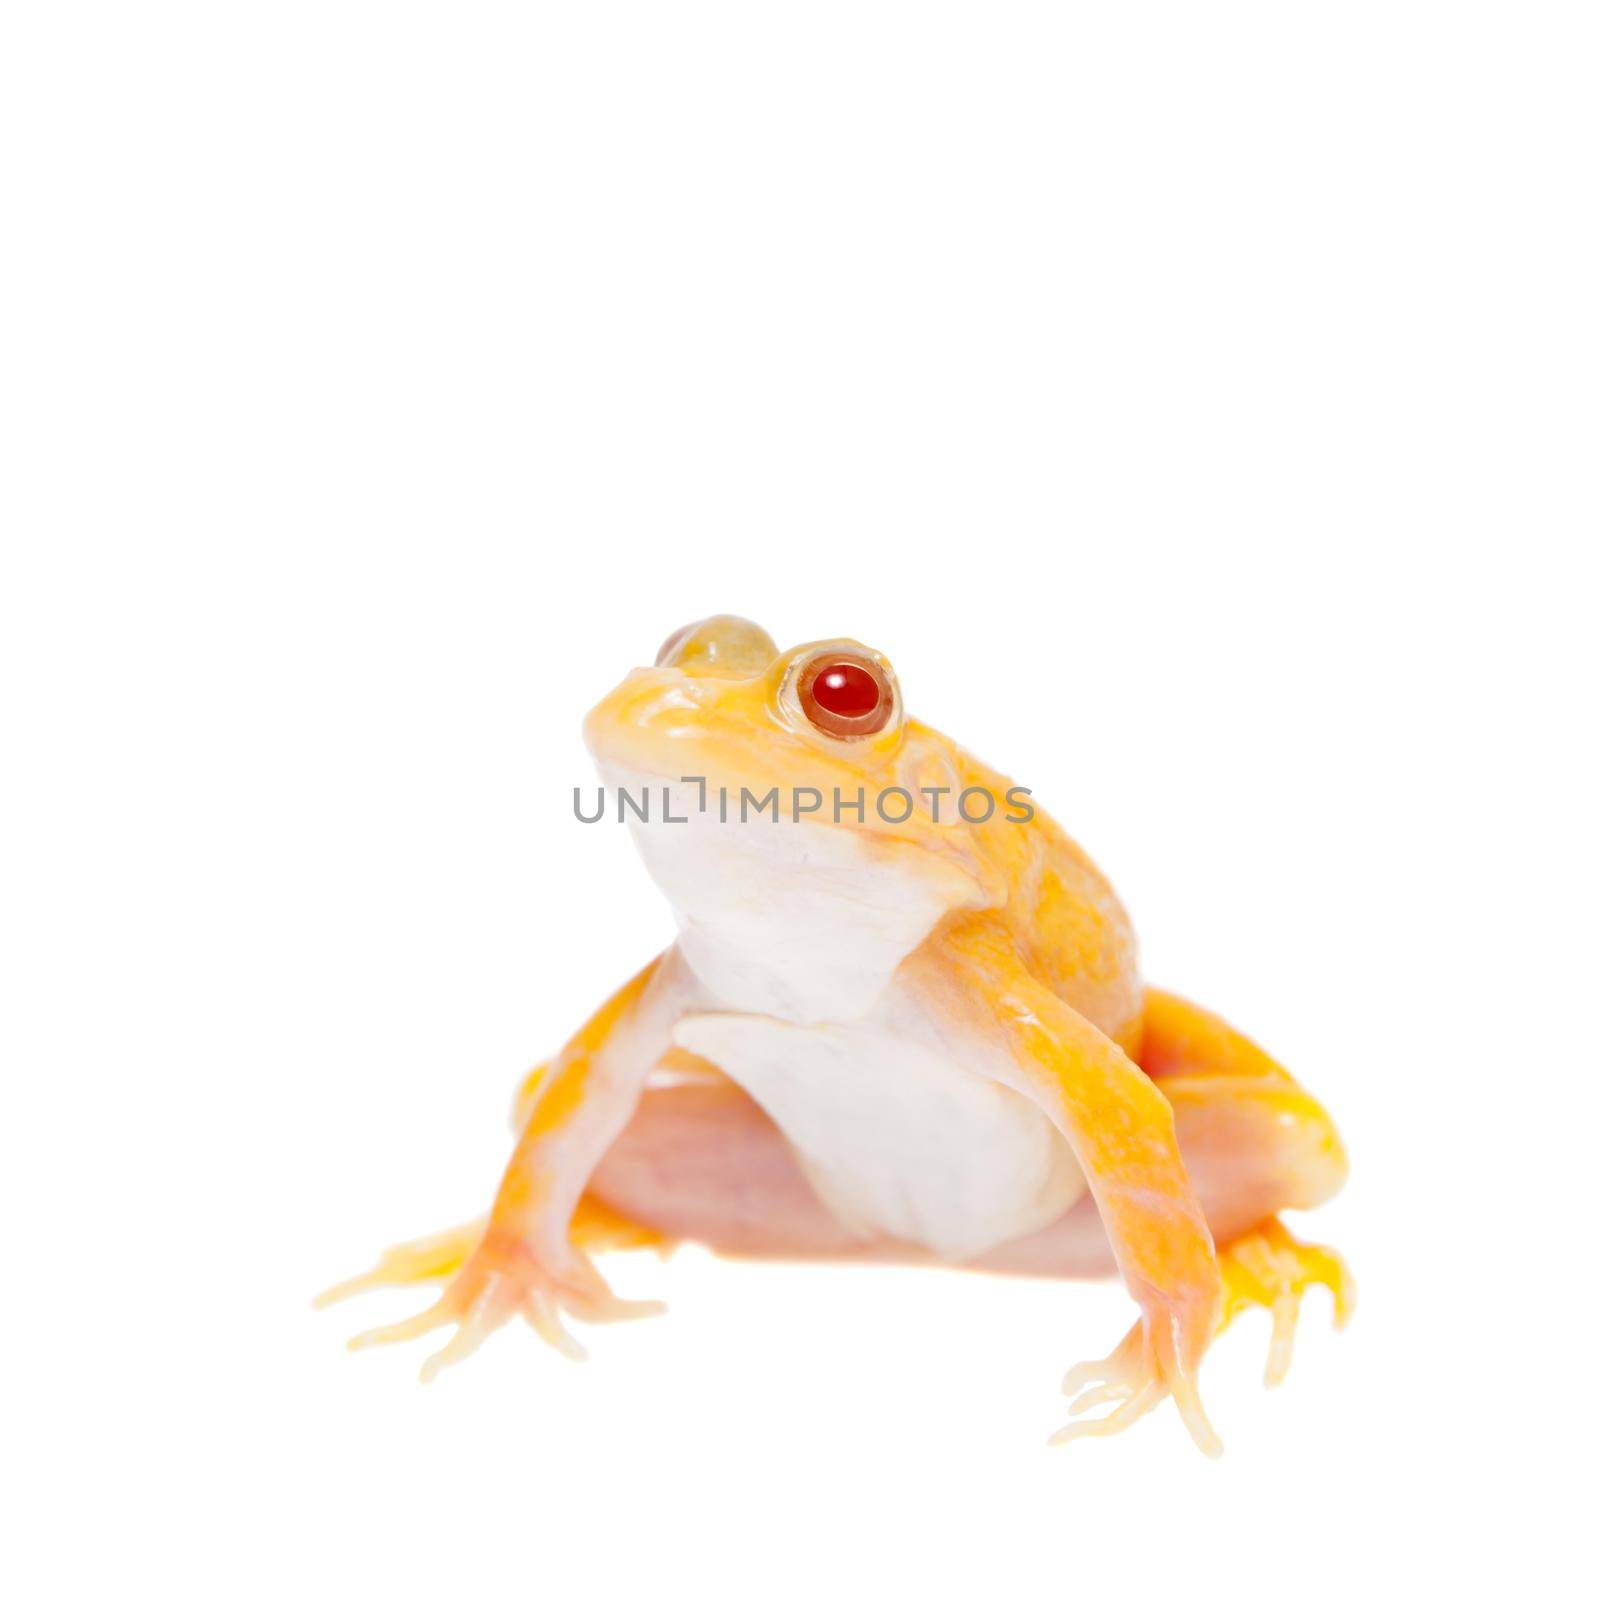 Albino Pool Frog on white, Pelophylax lessonae by RosaJay